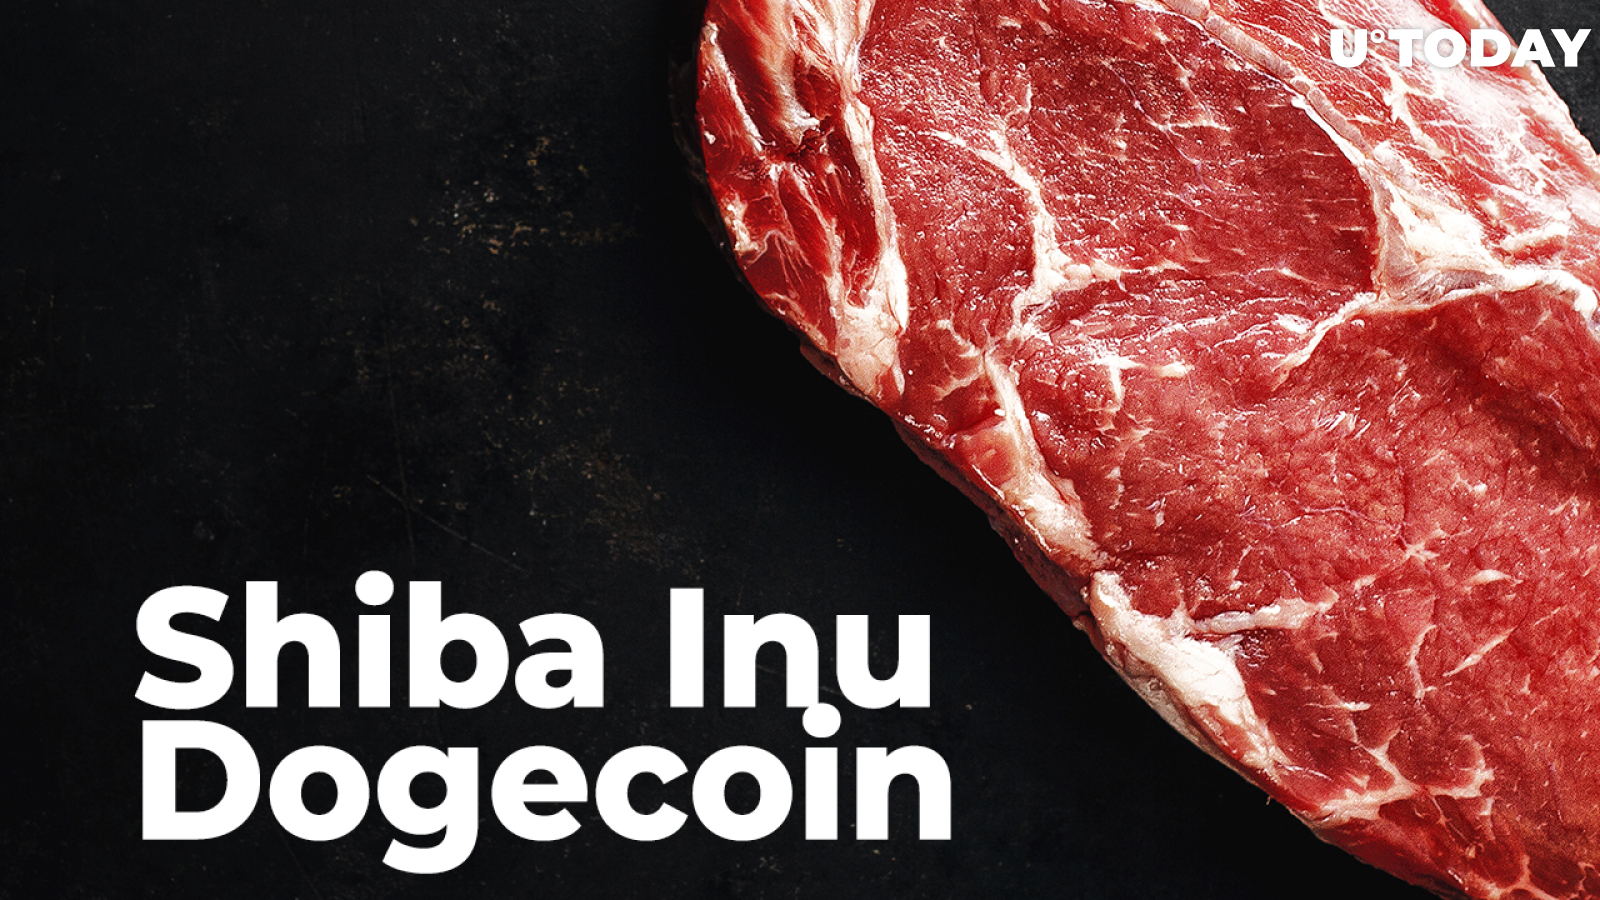 Shiba Inu and Dogecoin Now Accepted by Vancouver-Based Meat Company Through BitPay